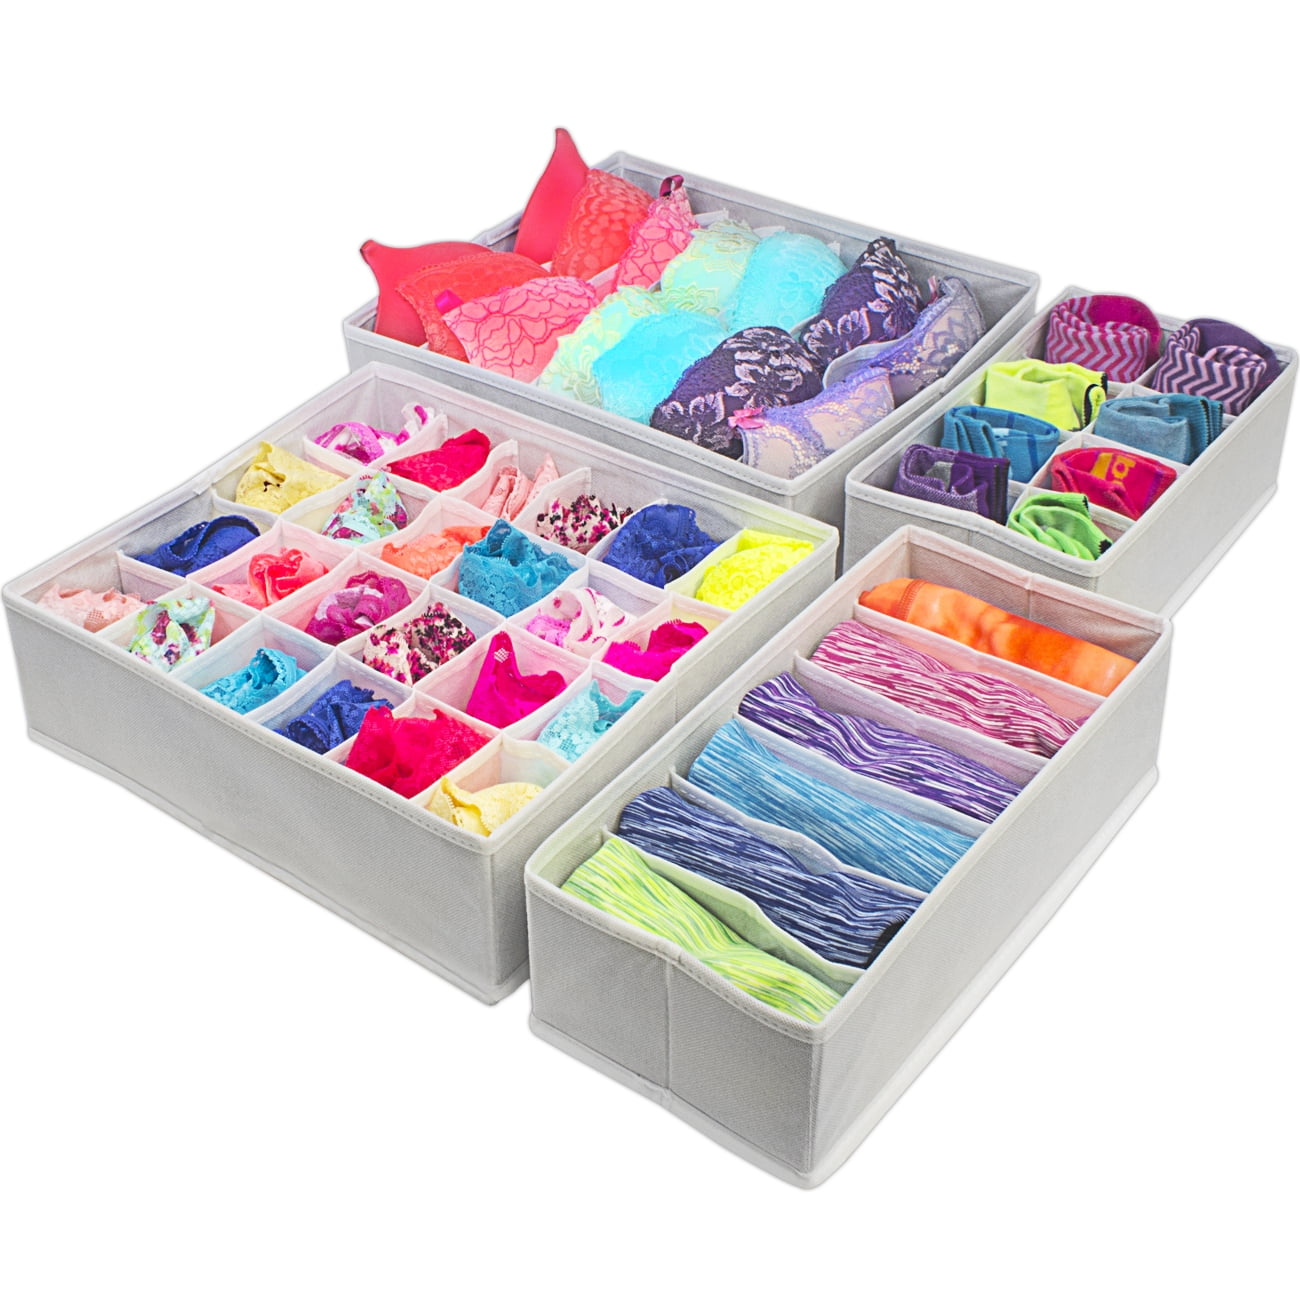 16 Pockets Compartment Craft Underwear Storage Foldable Plastic Tray Case Pink 